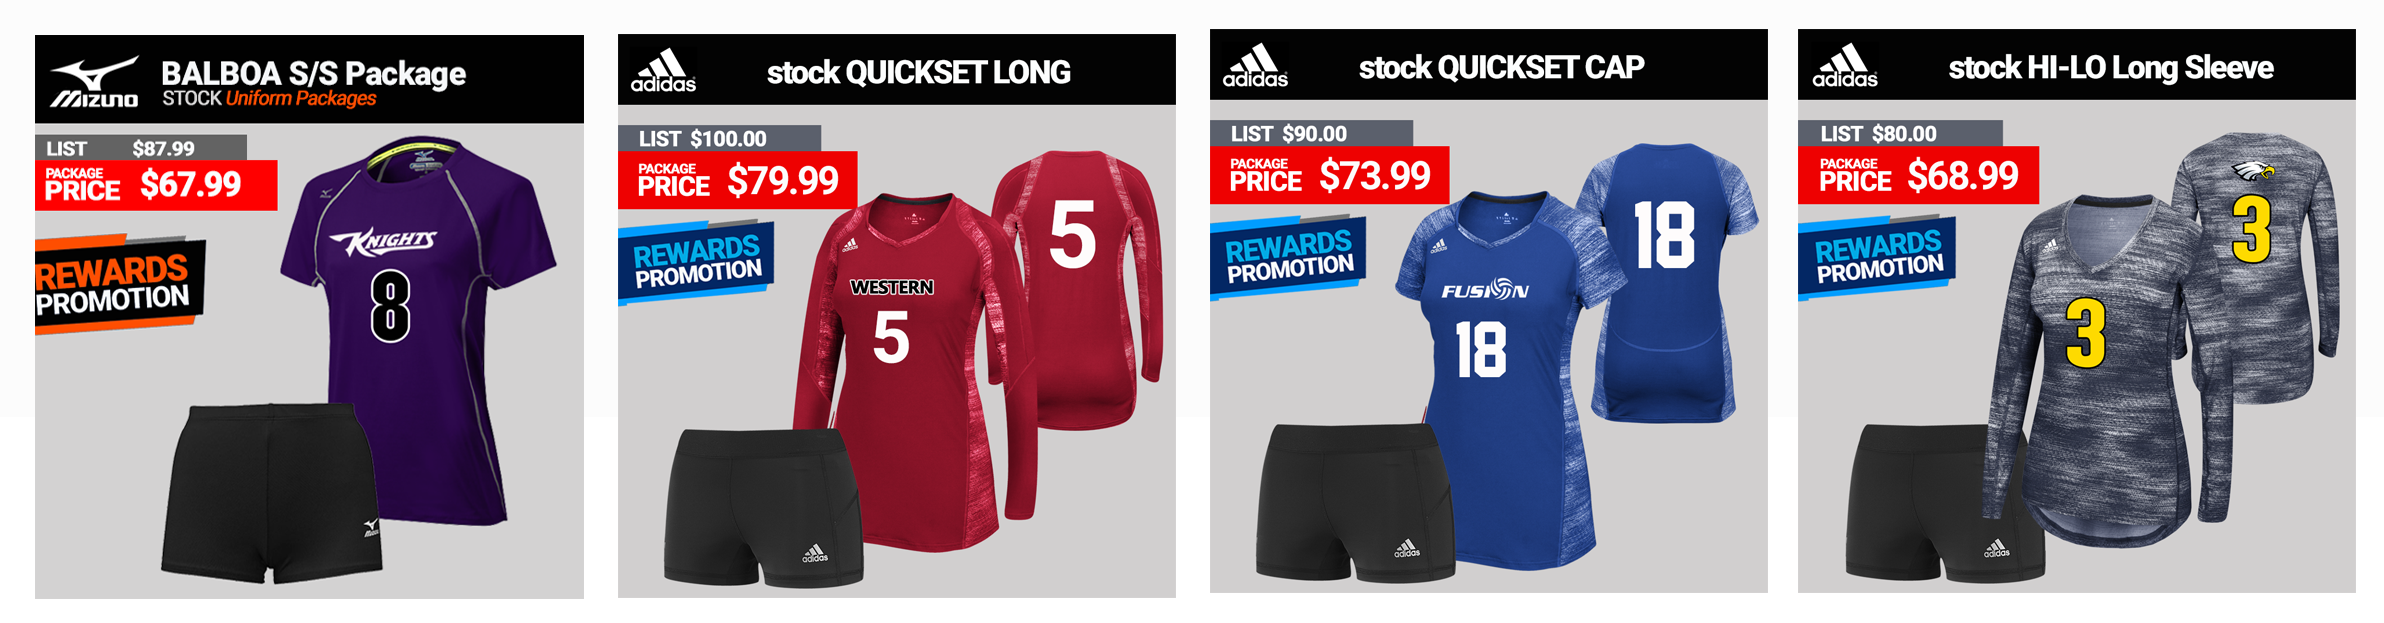 Adidas Stock Volleyball Uniform Packages